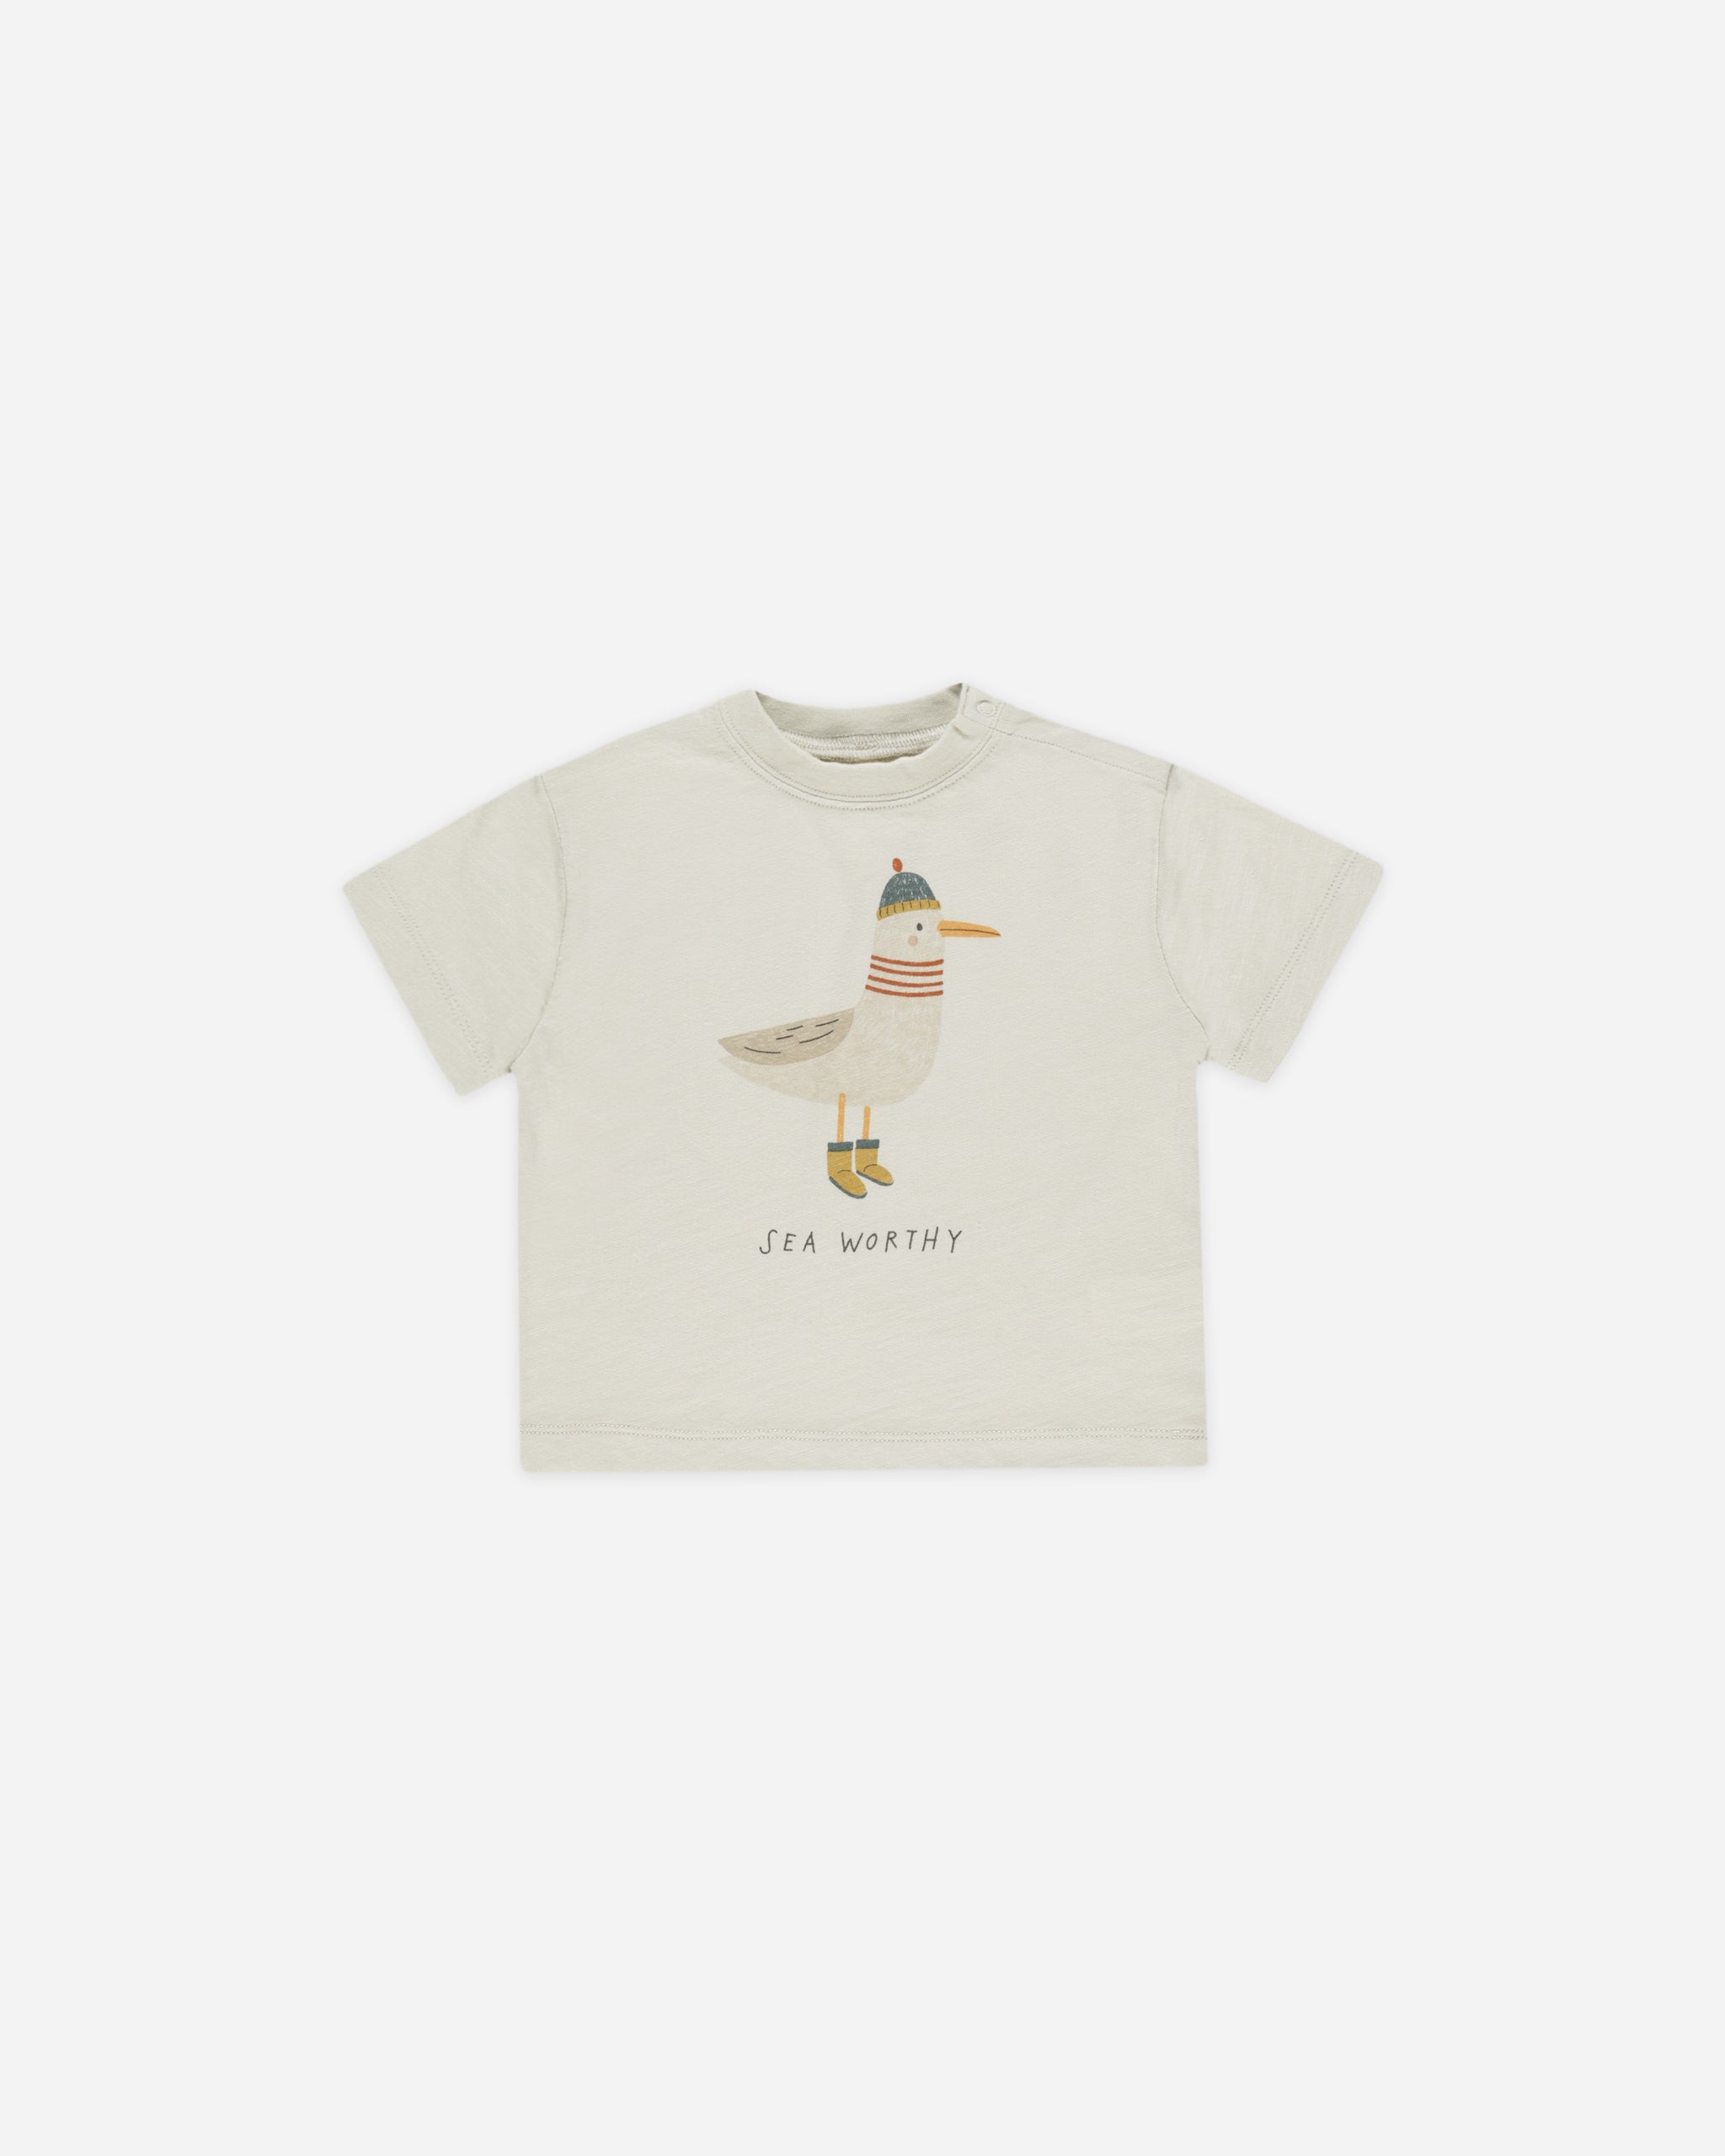 Relaxed Tee || Seagull - Rylee + Cru | Kids Clothes | Trendy Baby Clothes | Modern Infant Outfits |